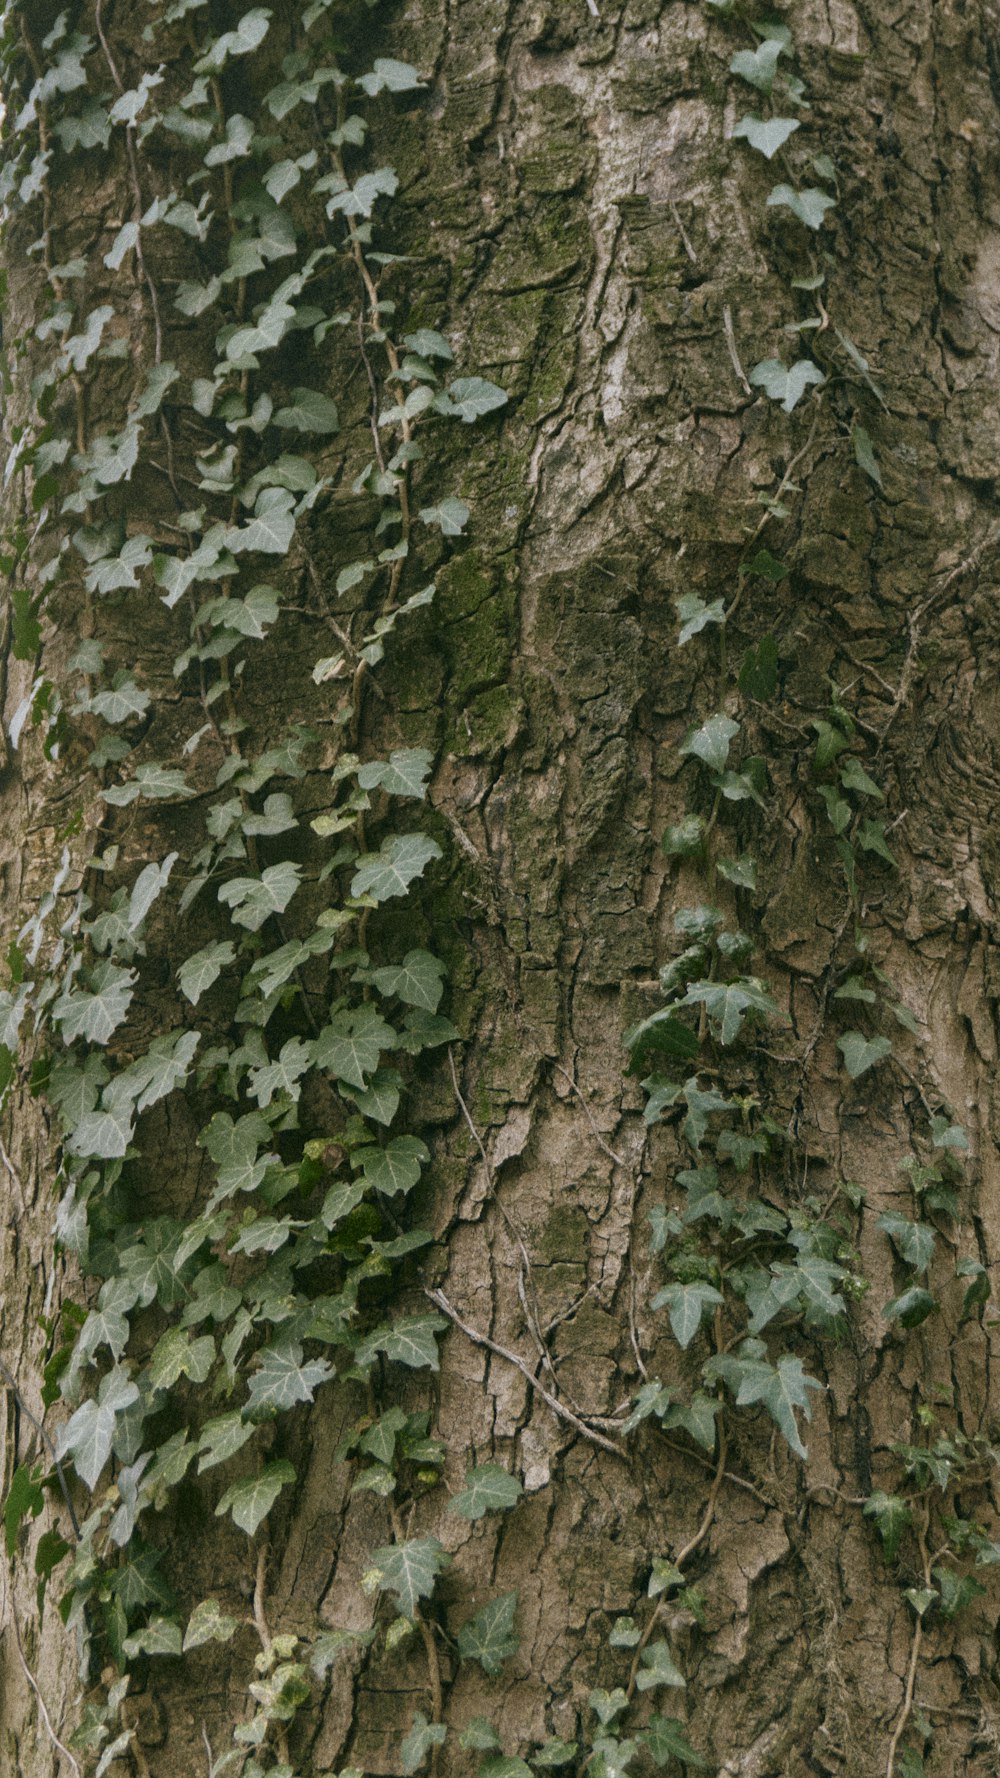 a close up of a tree with vines growing on it